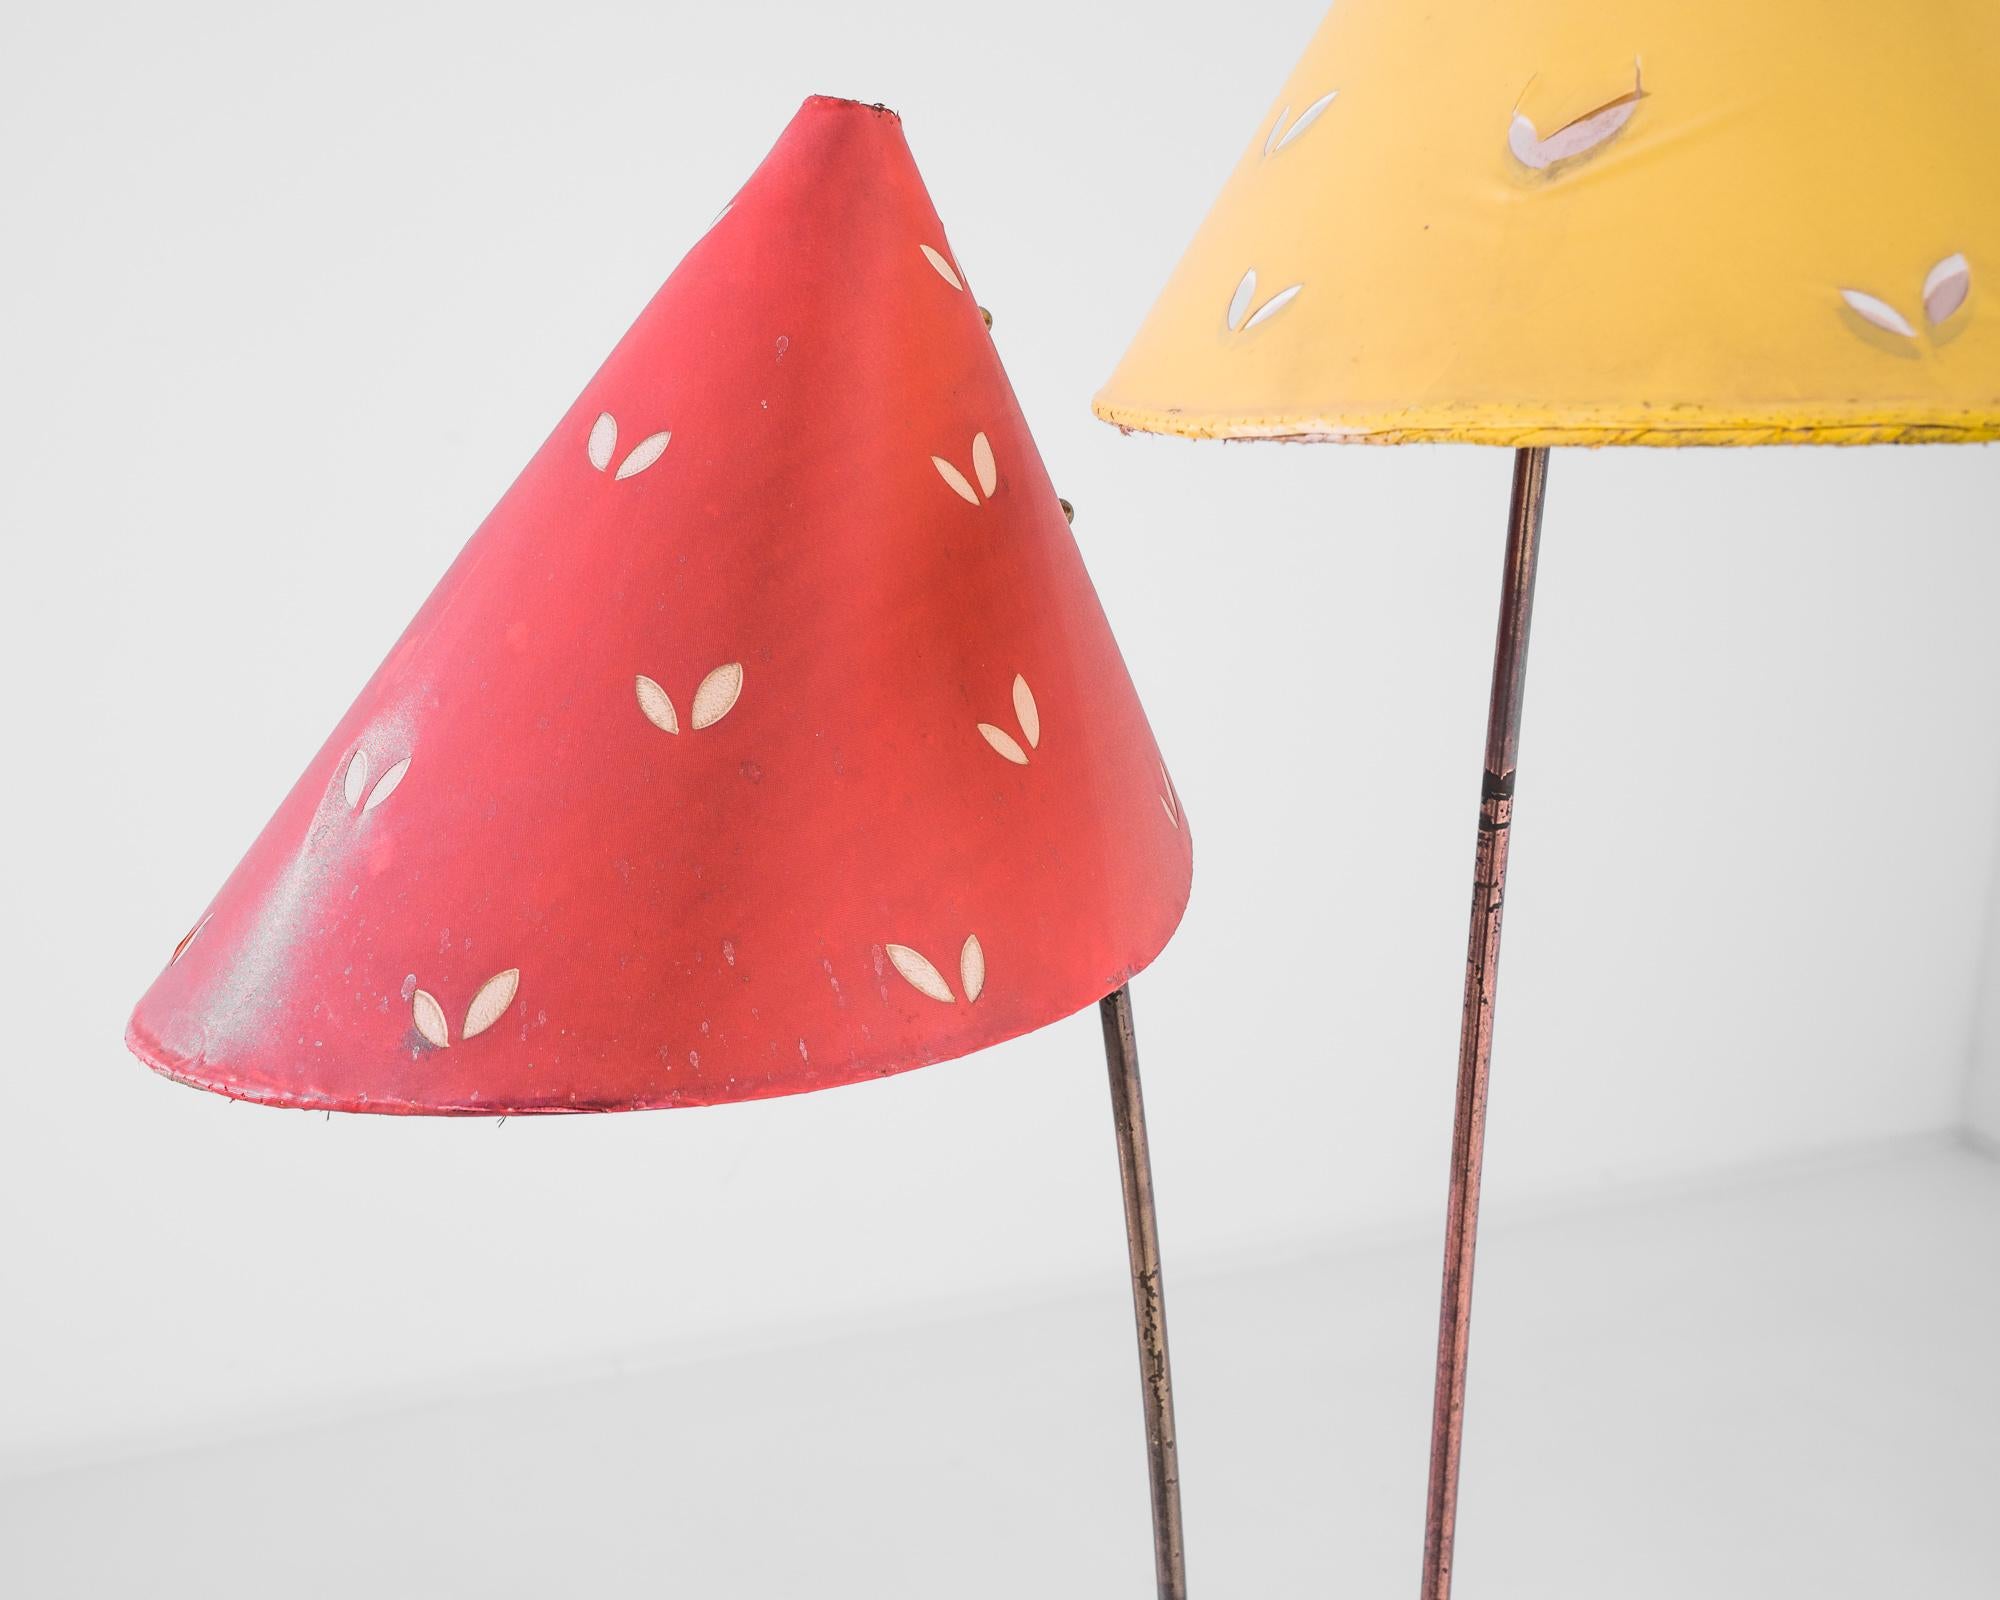 Step into the retro ambiance of the mid-20th century with this captivating 1950s Czech Metal Floor Lamp. Its dual-cone design, featuring a vibrant red and a sunny yellow shade, is sure to inject a playful pop of color into any interior. Each cone is